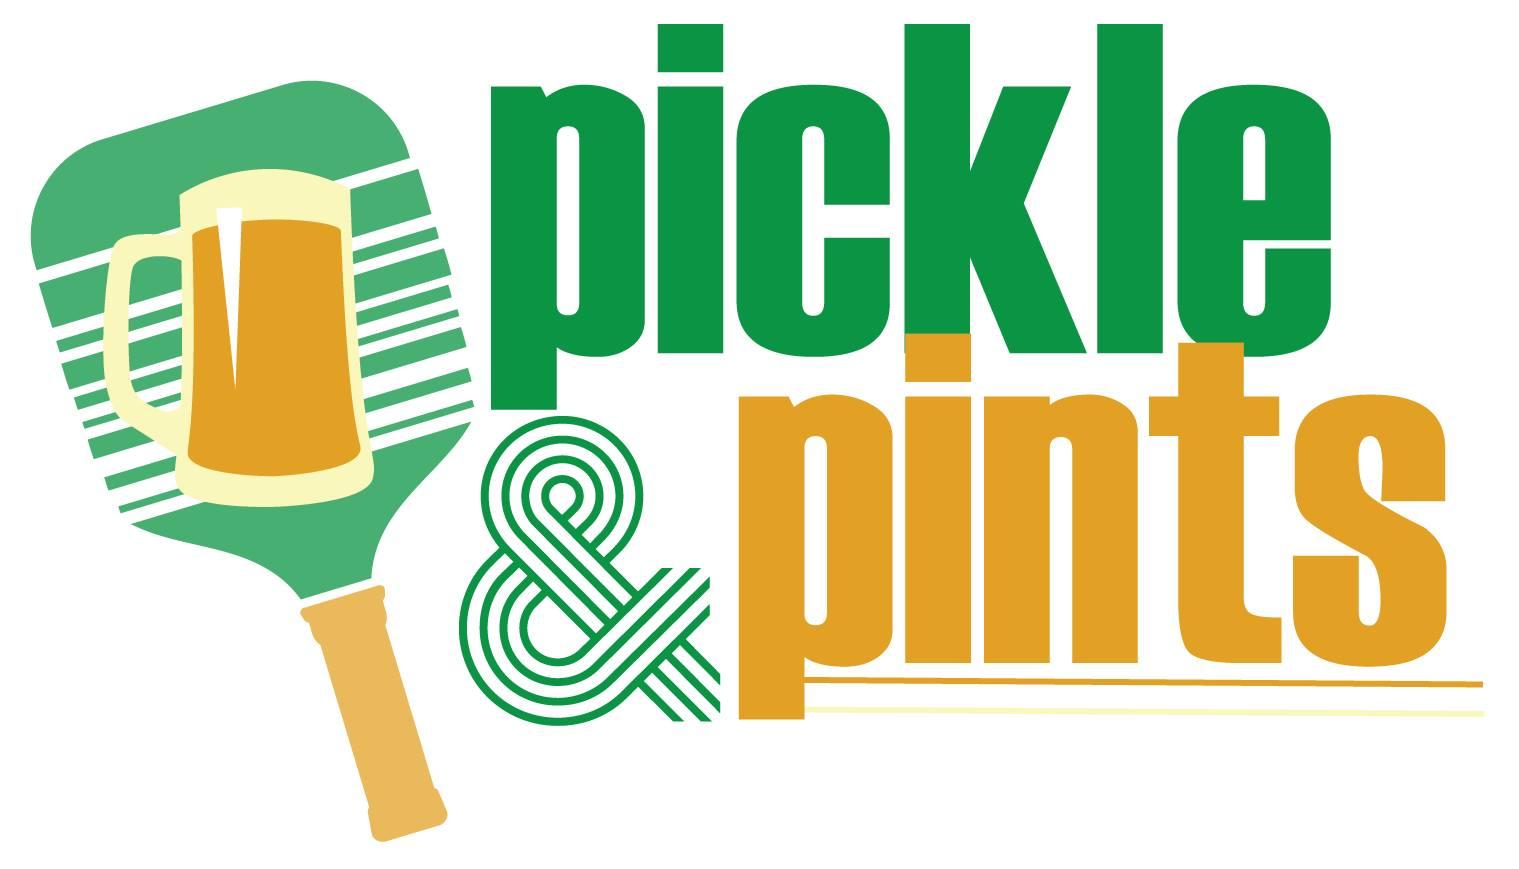 Pickle & Pints at Eureka Heights Brew Co